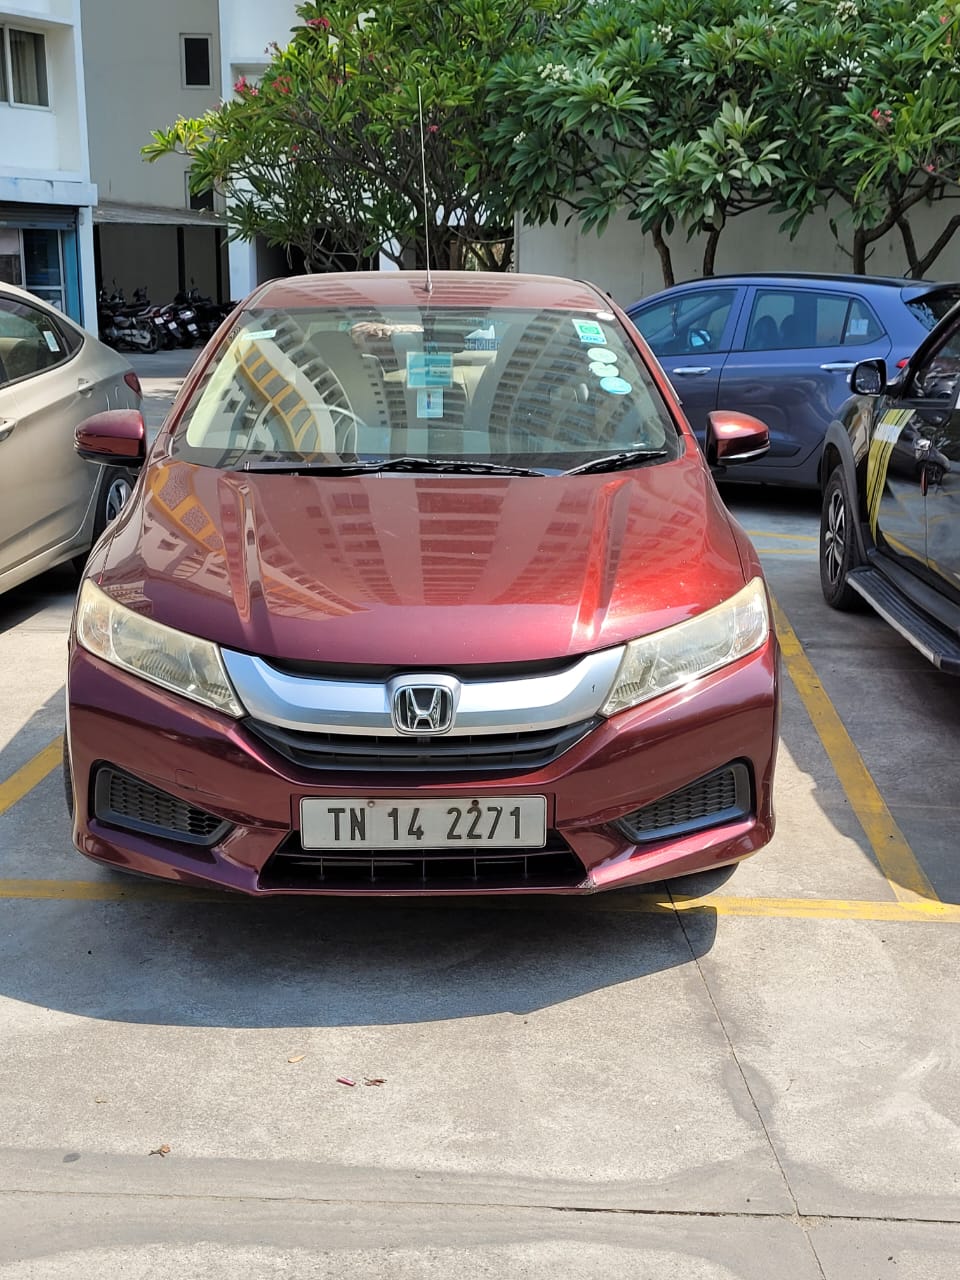 4656-for-sale-Honda-City-Petrol-First-Owner-2014-TN-registered-rs-575000